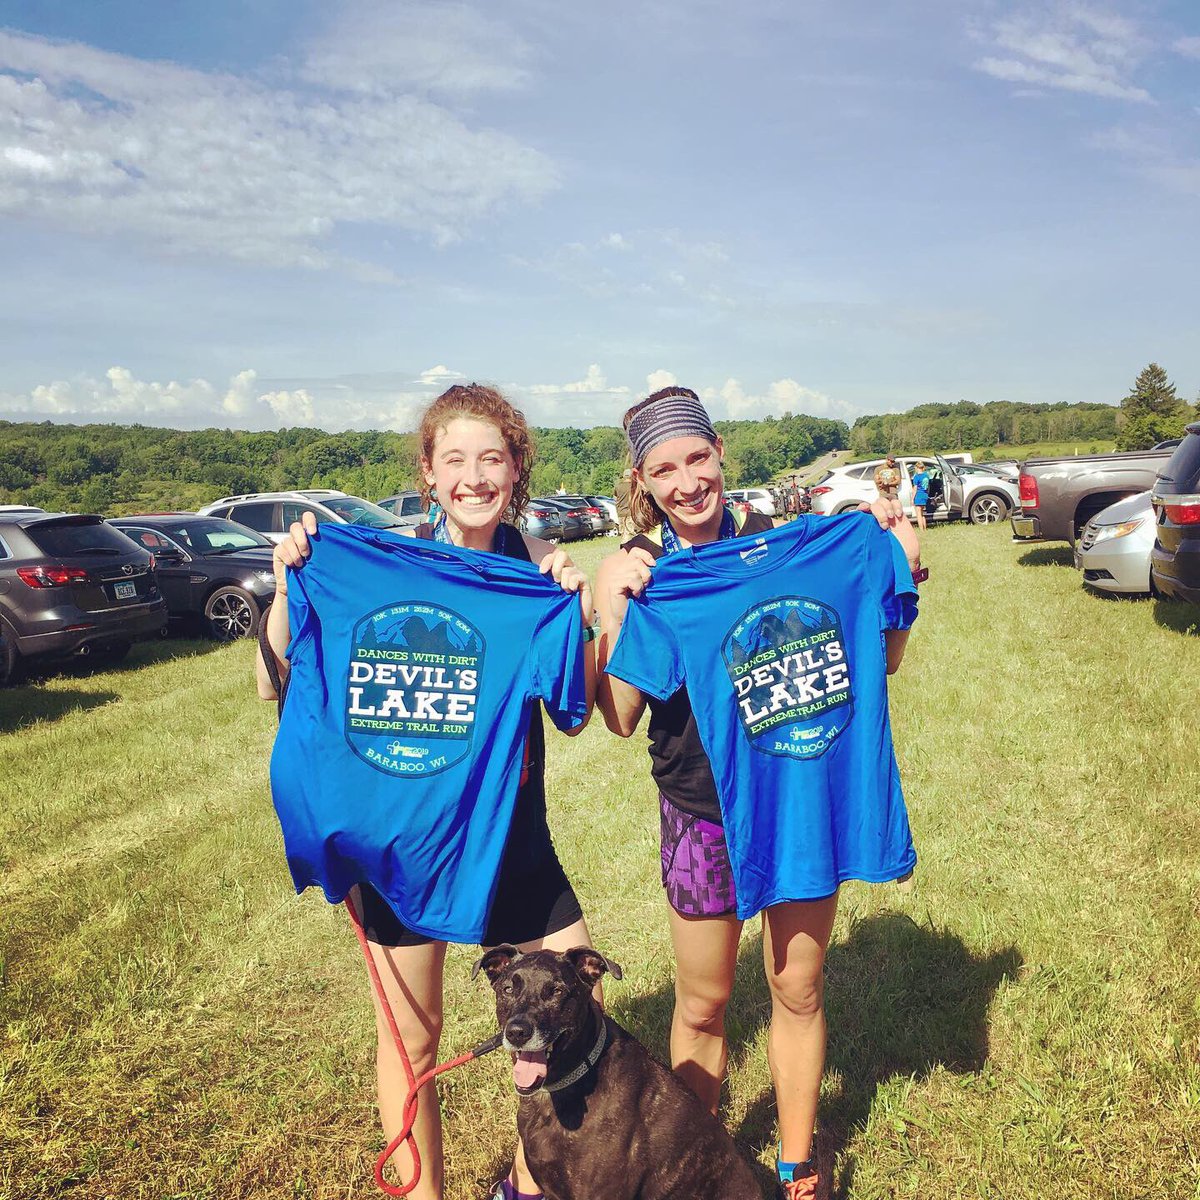 #DanceswithDirt 10k complete! 1st half tested our limits, but the sight @ top #devilslake was worth it! Plus the 2nd half was mostly downhill. S/O to @sofreshsoclleen 4 being my #runningbuddy!
#WorthIt #TrailRaces #TrailRunning #PushYourLimits #ChallengeYourself #TheMentalClutch